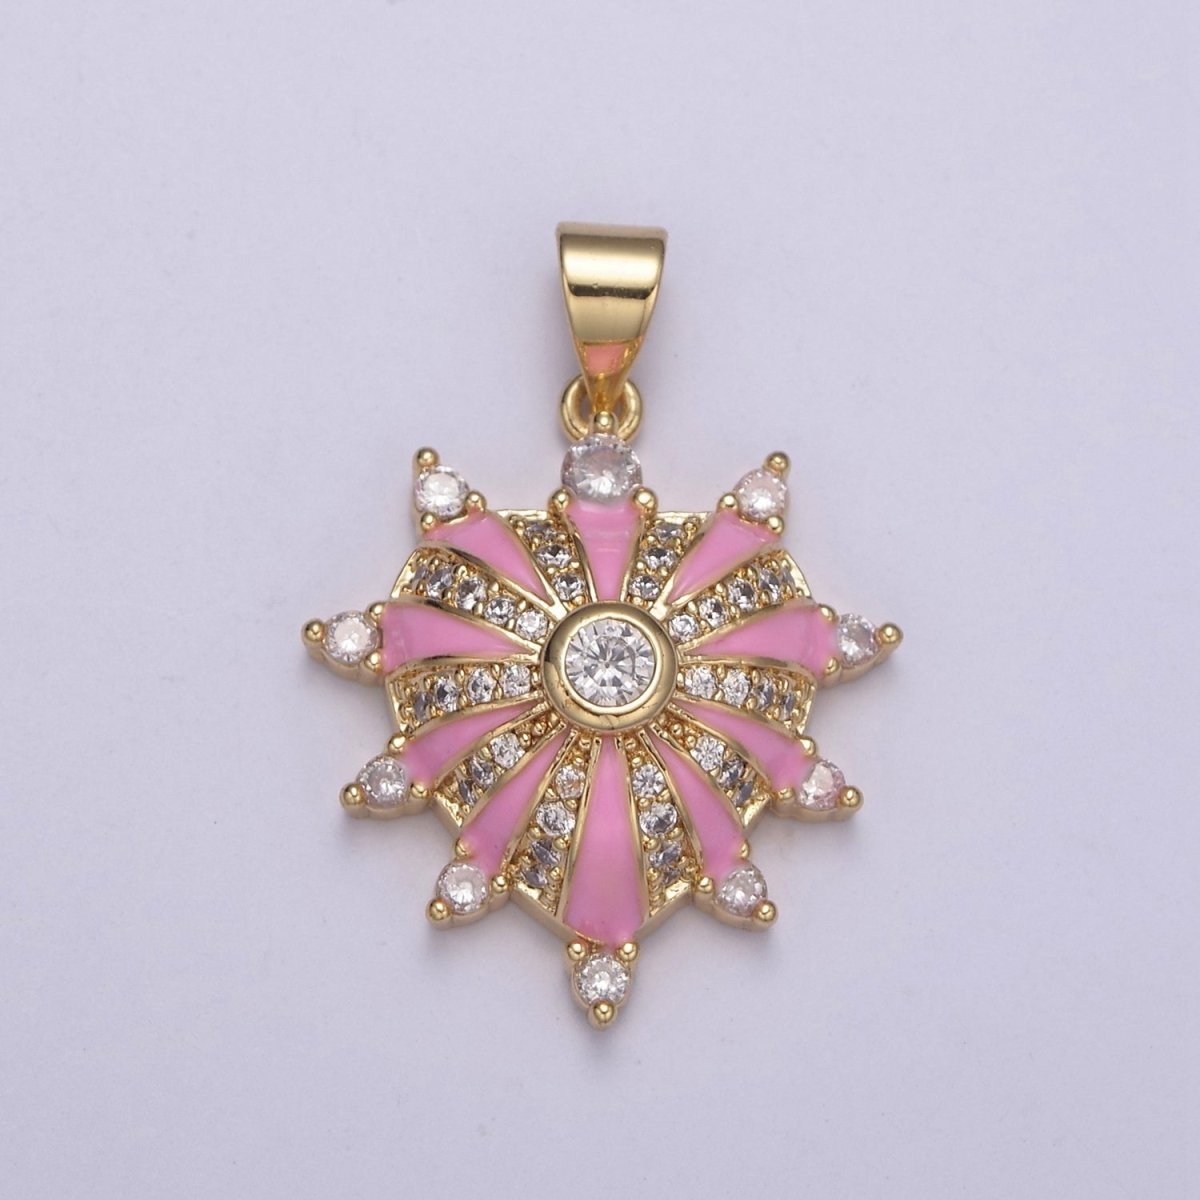 Dainty Gold Filled Heart Charm Enamel Love Medallion with Sunburst Radial Heart Pendant for Valentine Jewelry Making H-436 H439 H-440 H-441 - DLUXCA